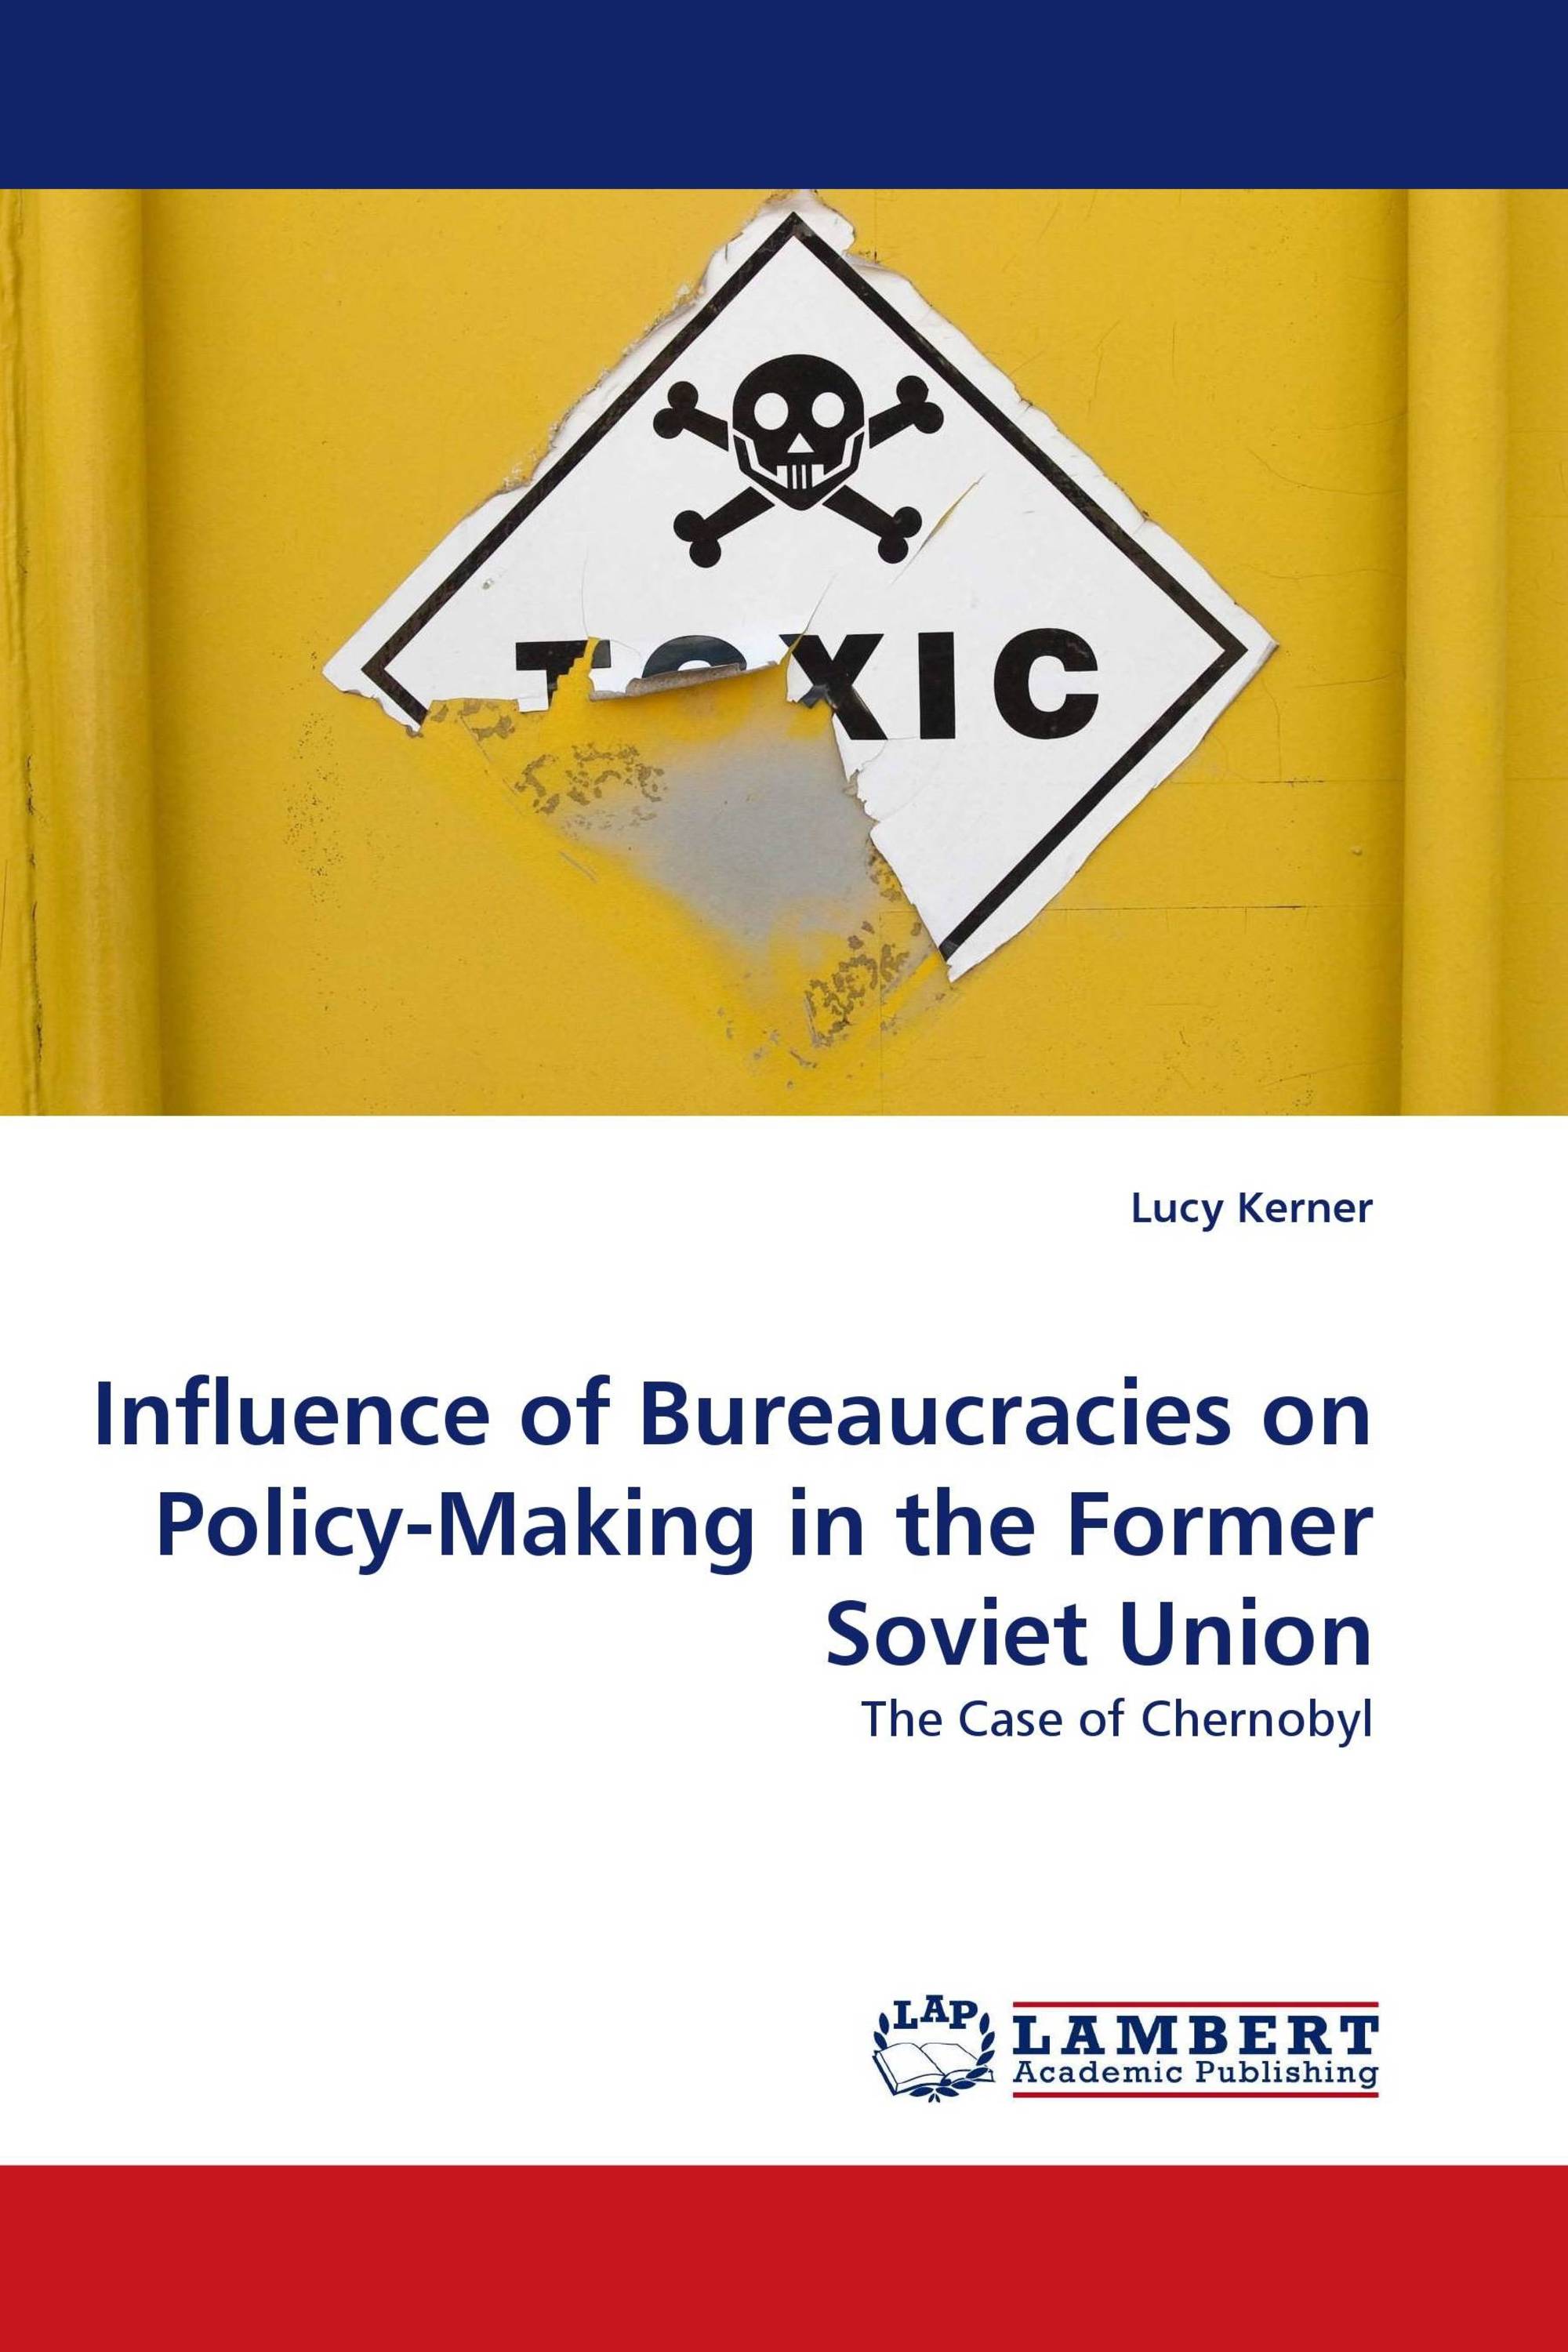 Influence of Bureaucracies on Policy-Making in the Former Soviet Union